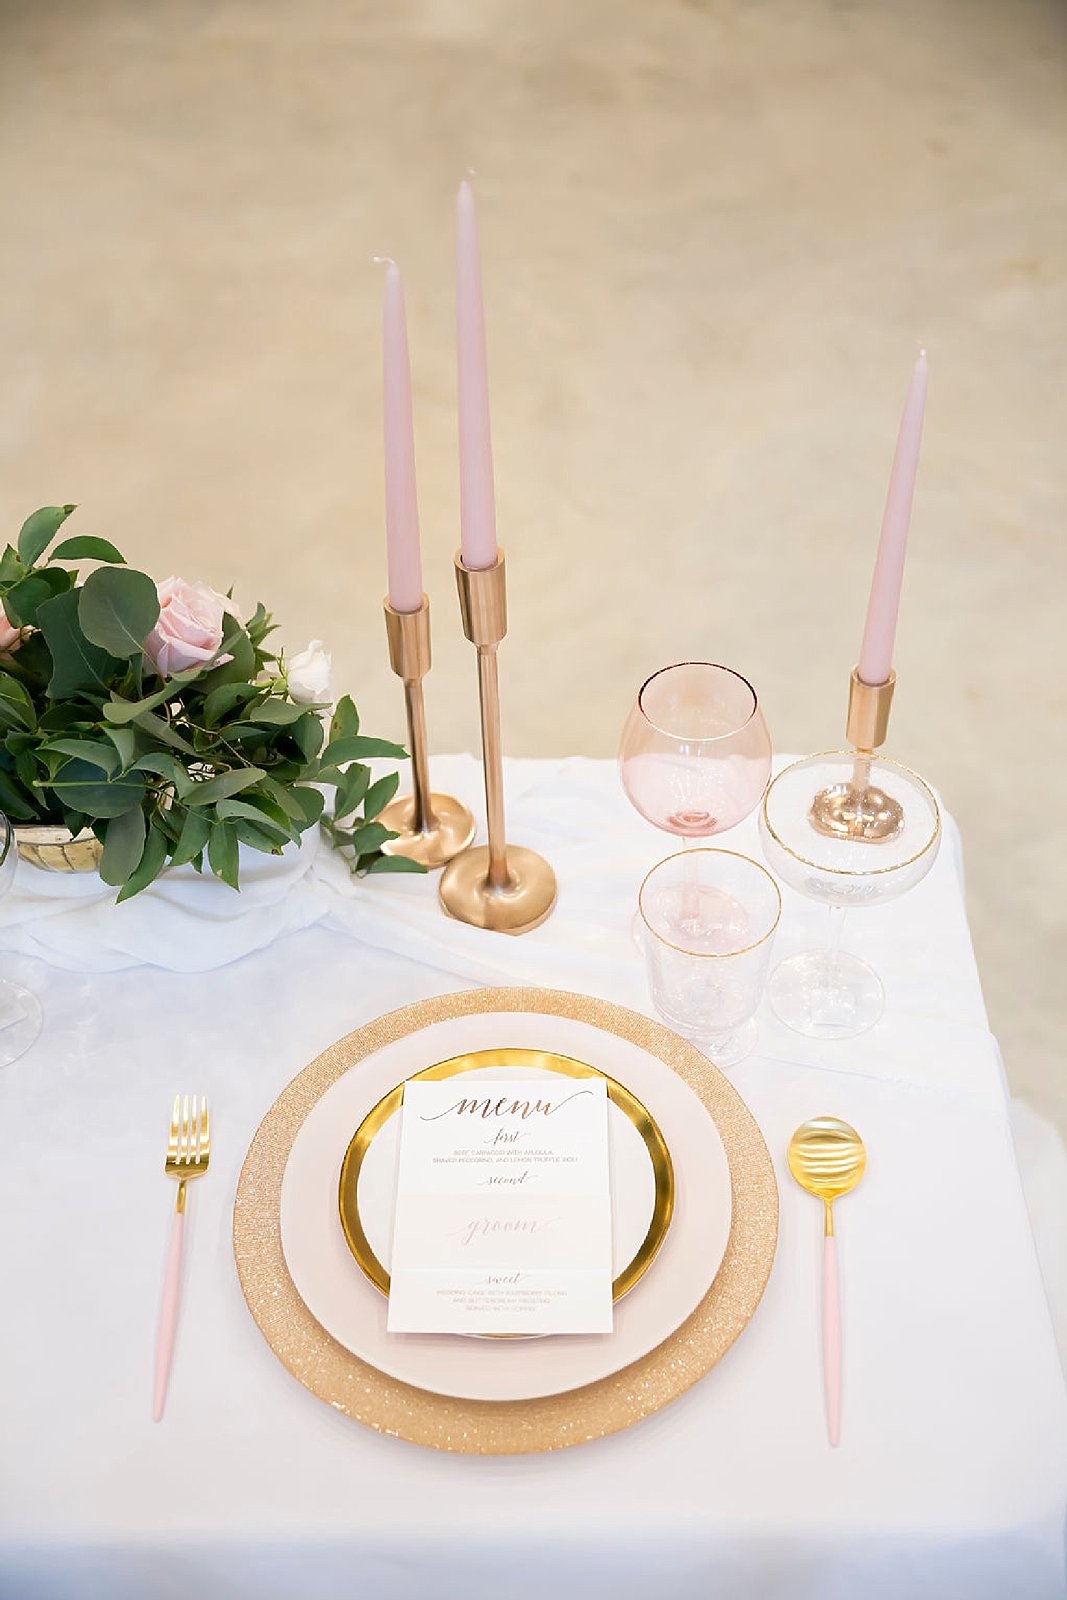 gold and blush wedding details photographed by Randi Michelle Photography at Dallas TX wedding venue the Establishment Barn